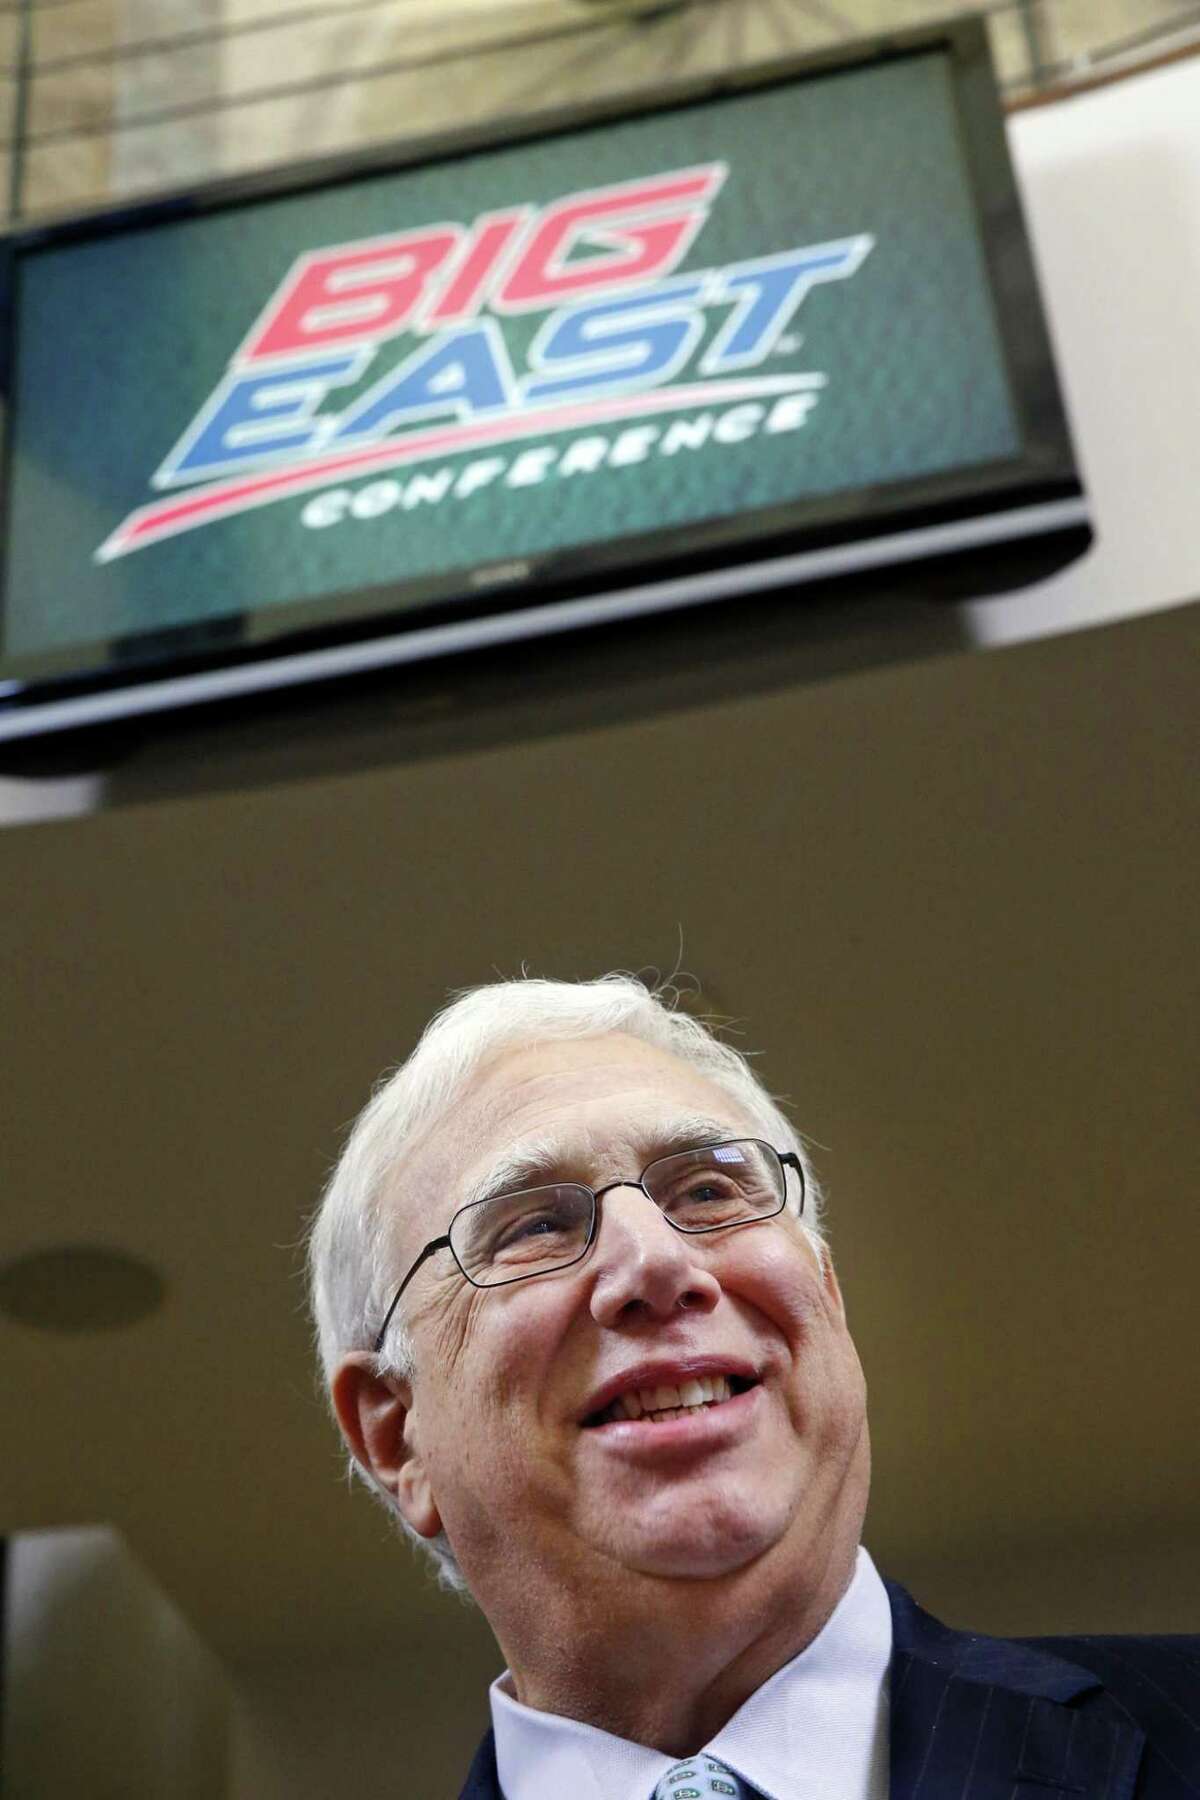 Tulane President Scott Cowen speaks during a news conference in New Orleans, Tuesday, Nov 27. By The Associated Press